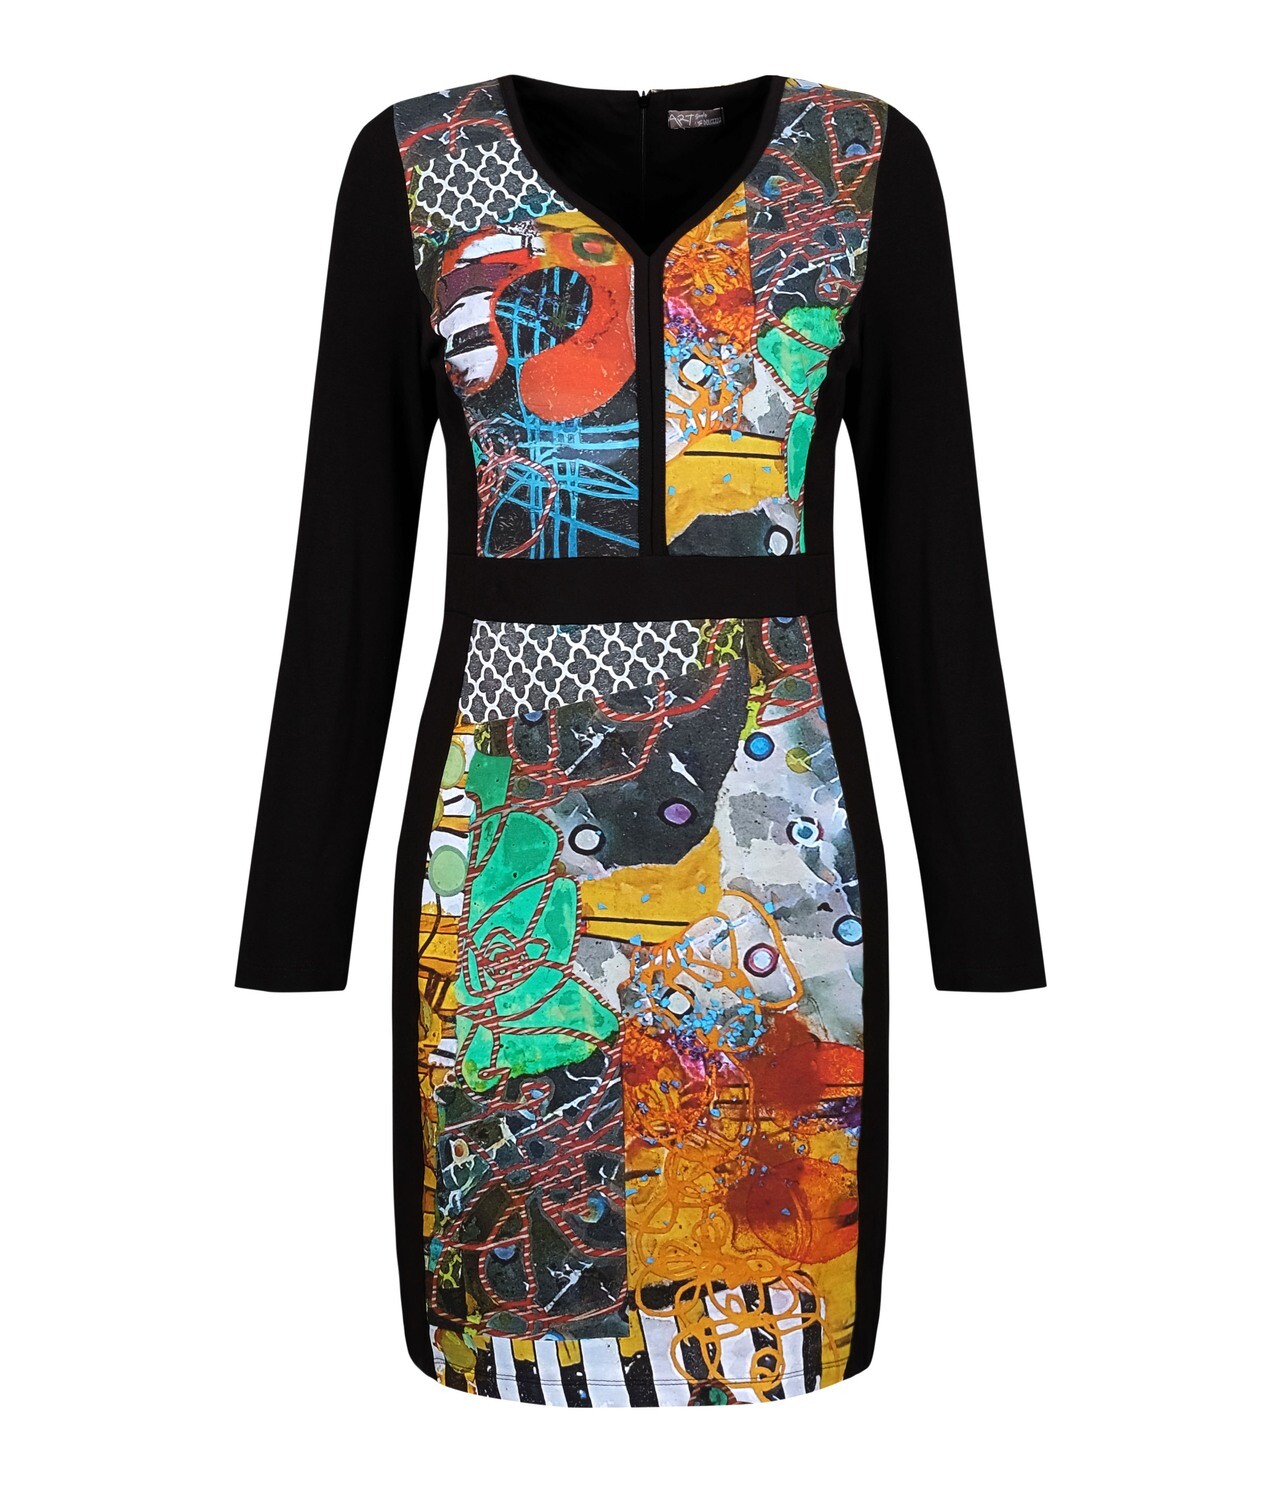 Simply Art Dolcezza: Colors Of Flight Aviary Abstract Art Dress (2 Left!)